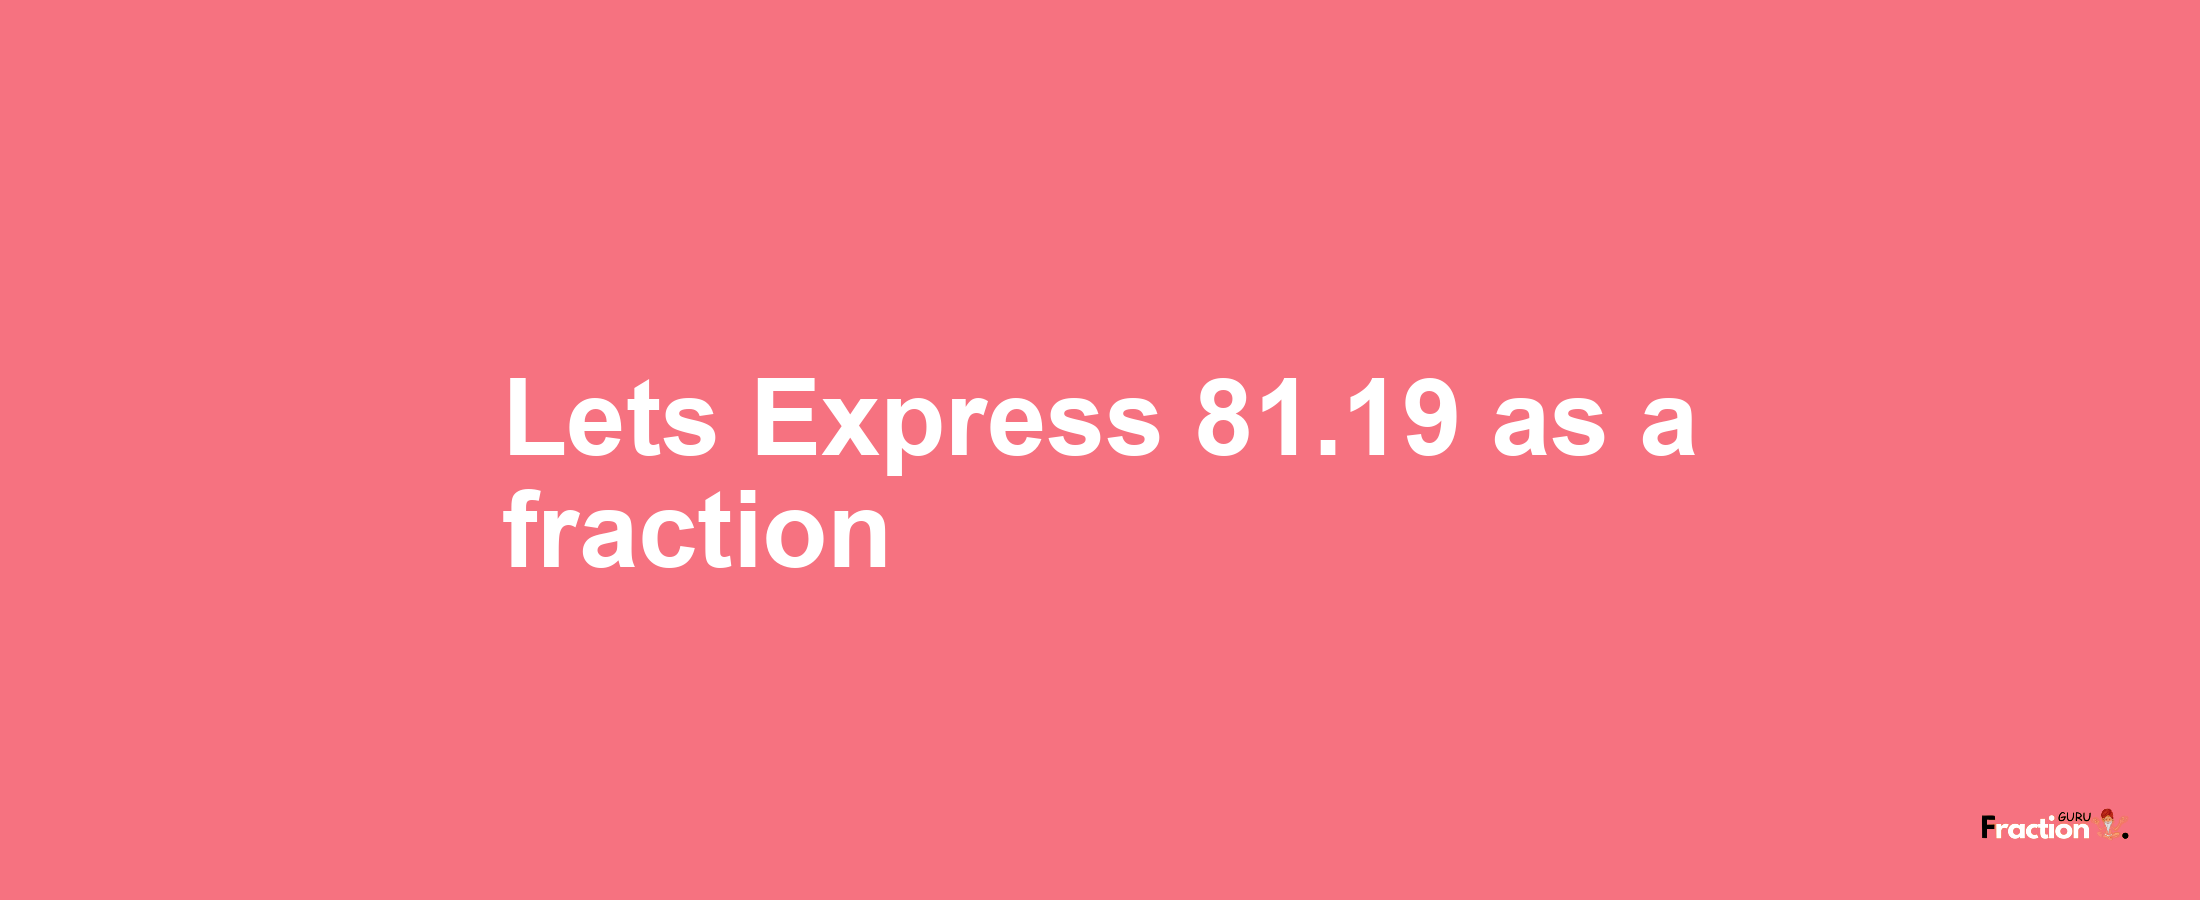 Lets Express 81.19 as afraction